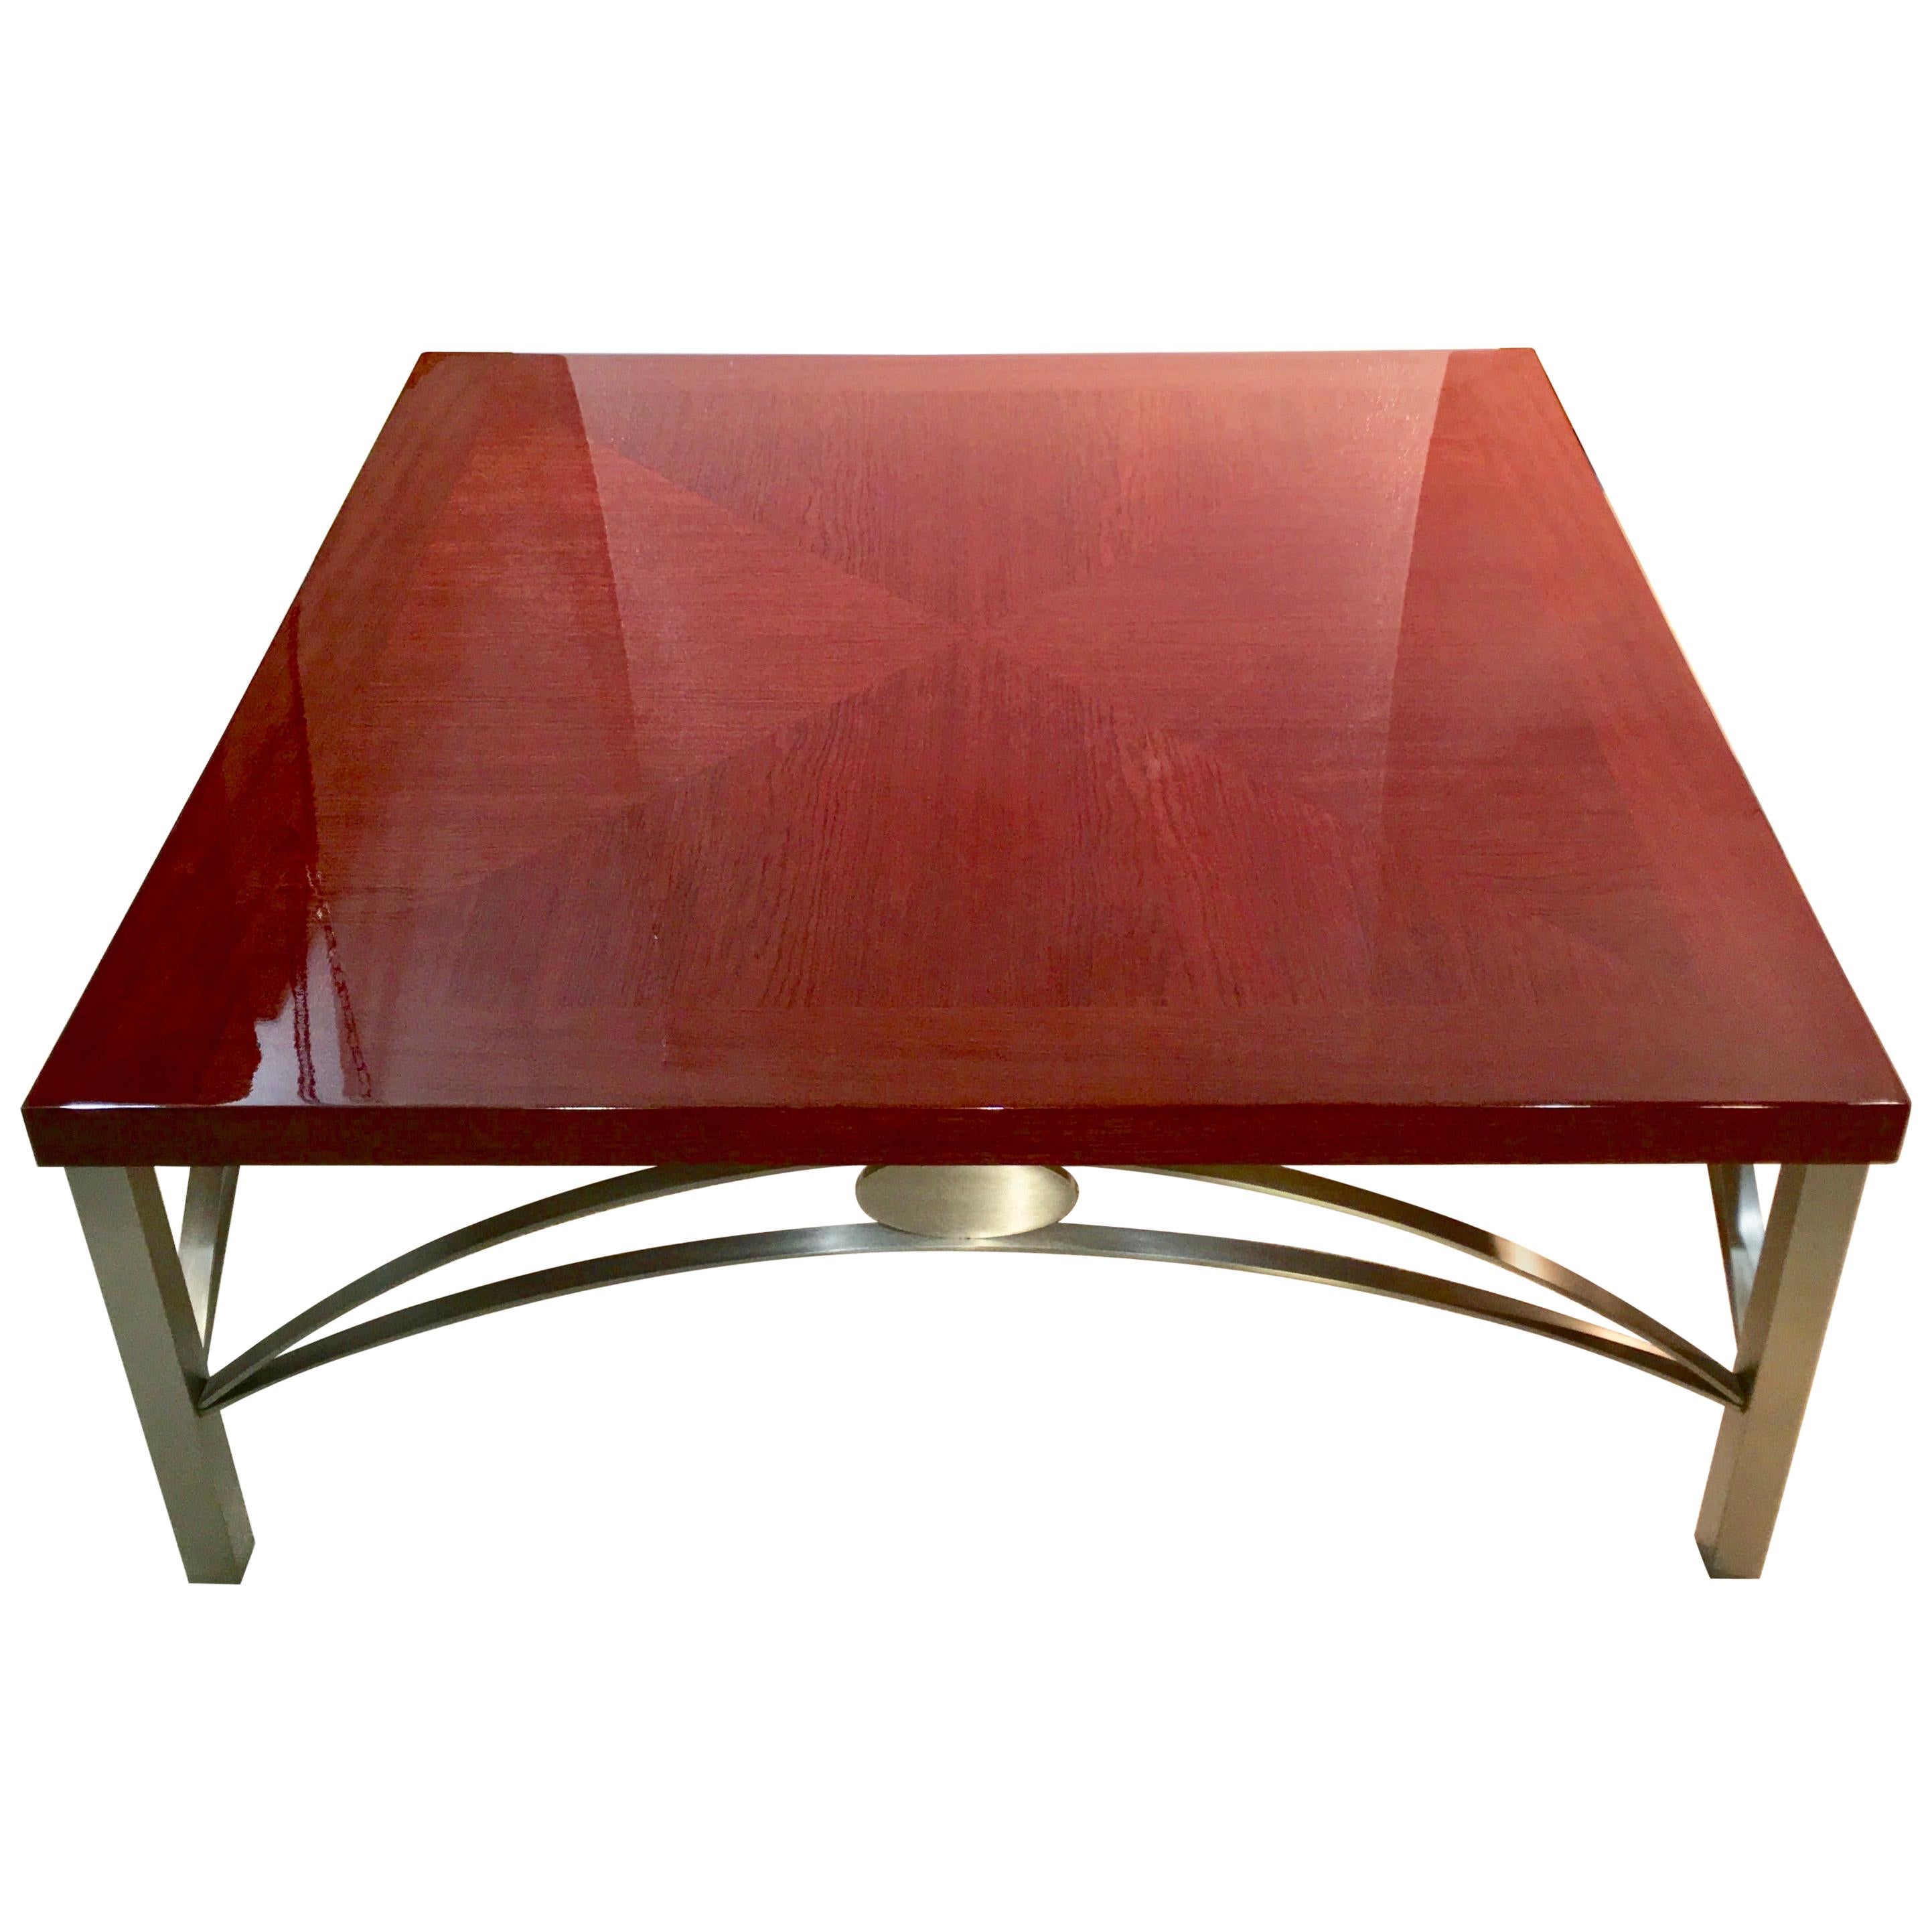 Designer Square Cocktail Table Padauk and Stainless Steel